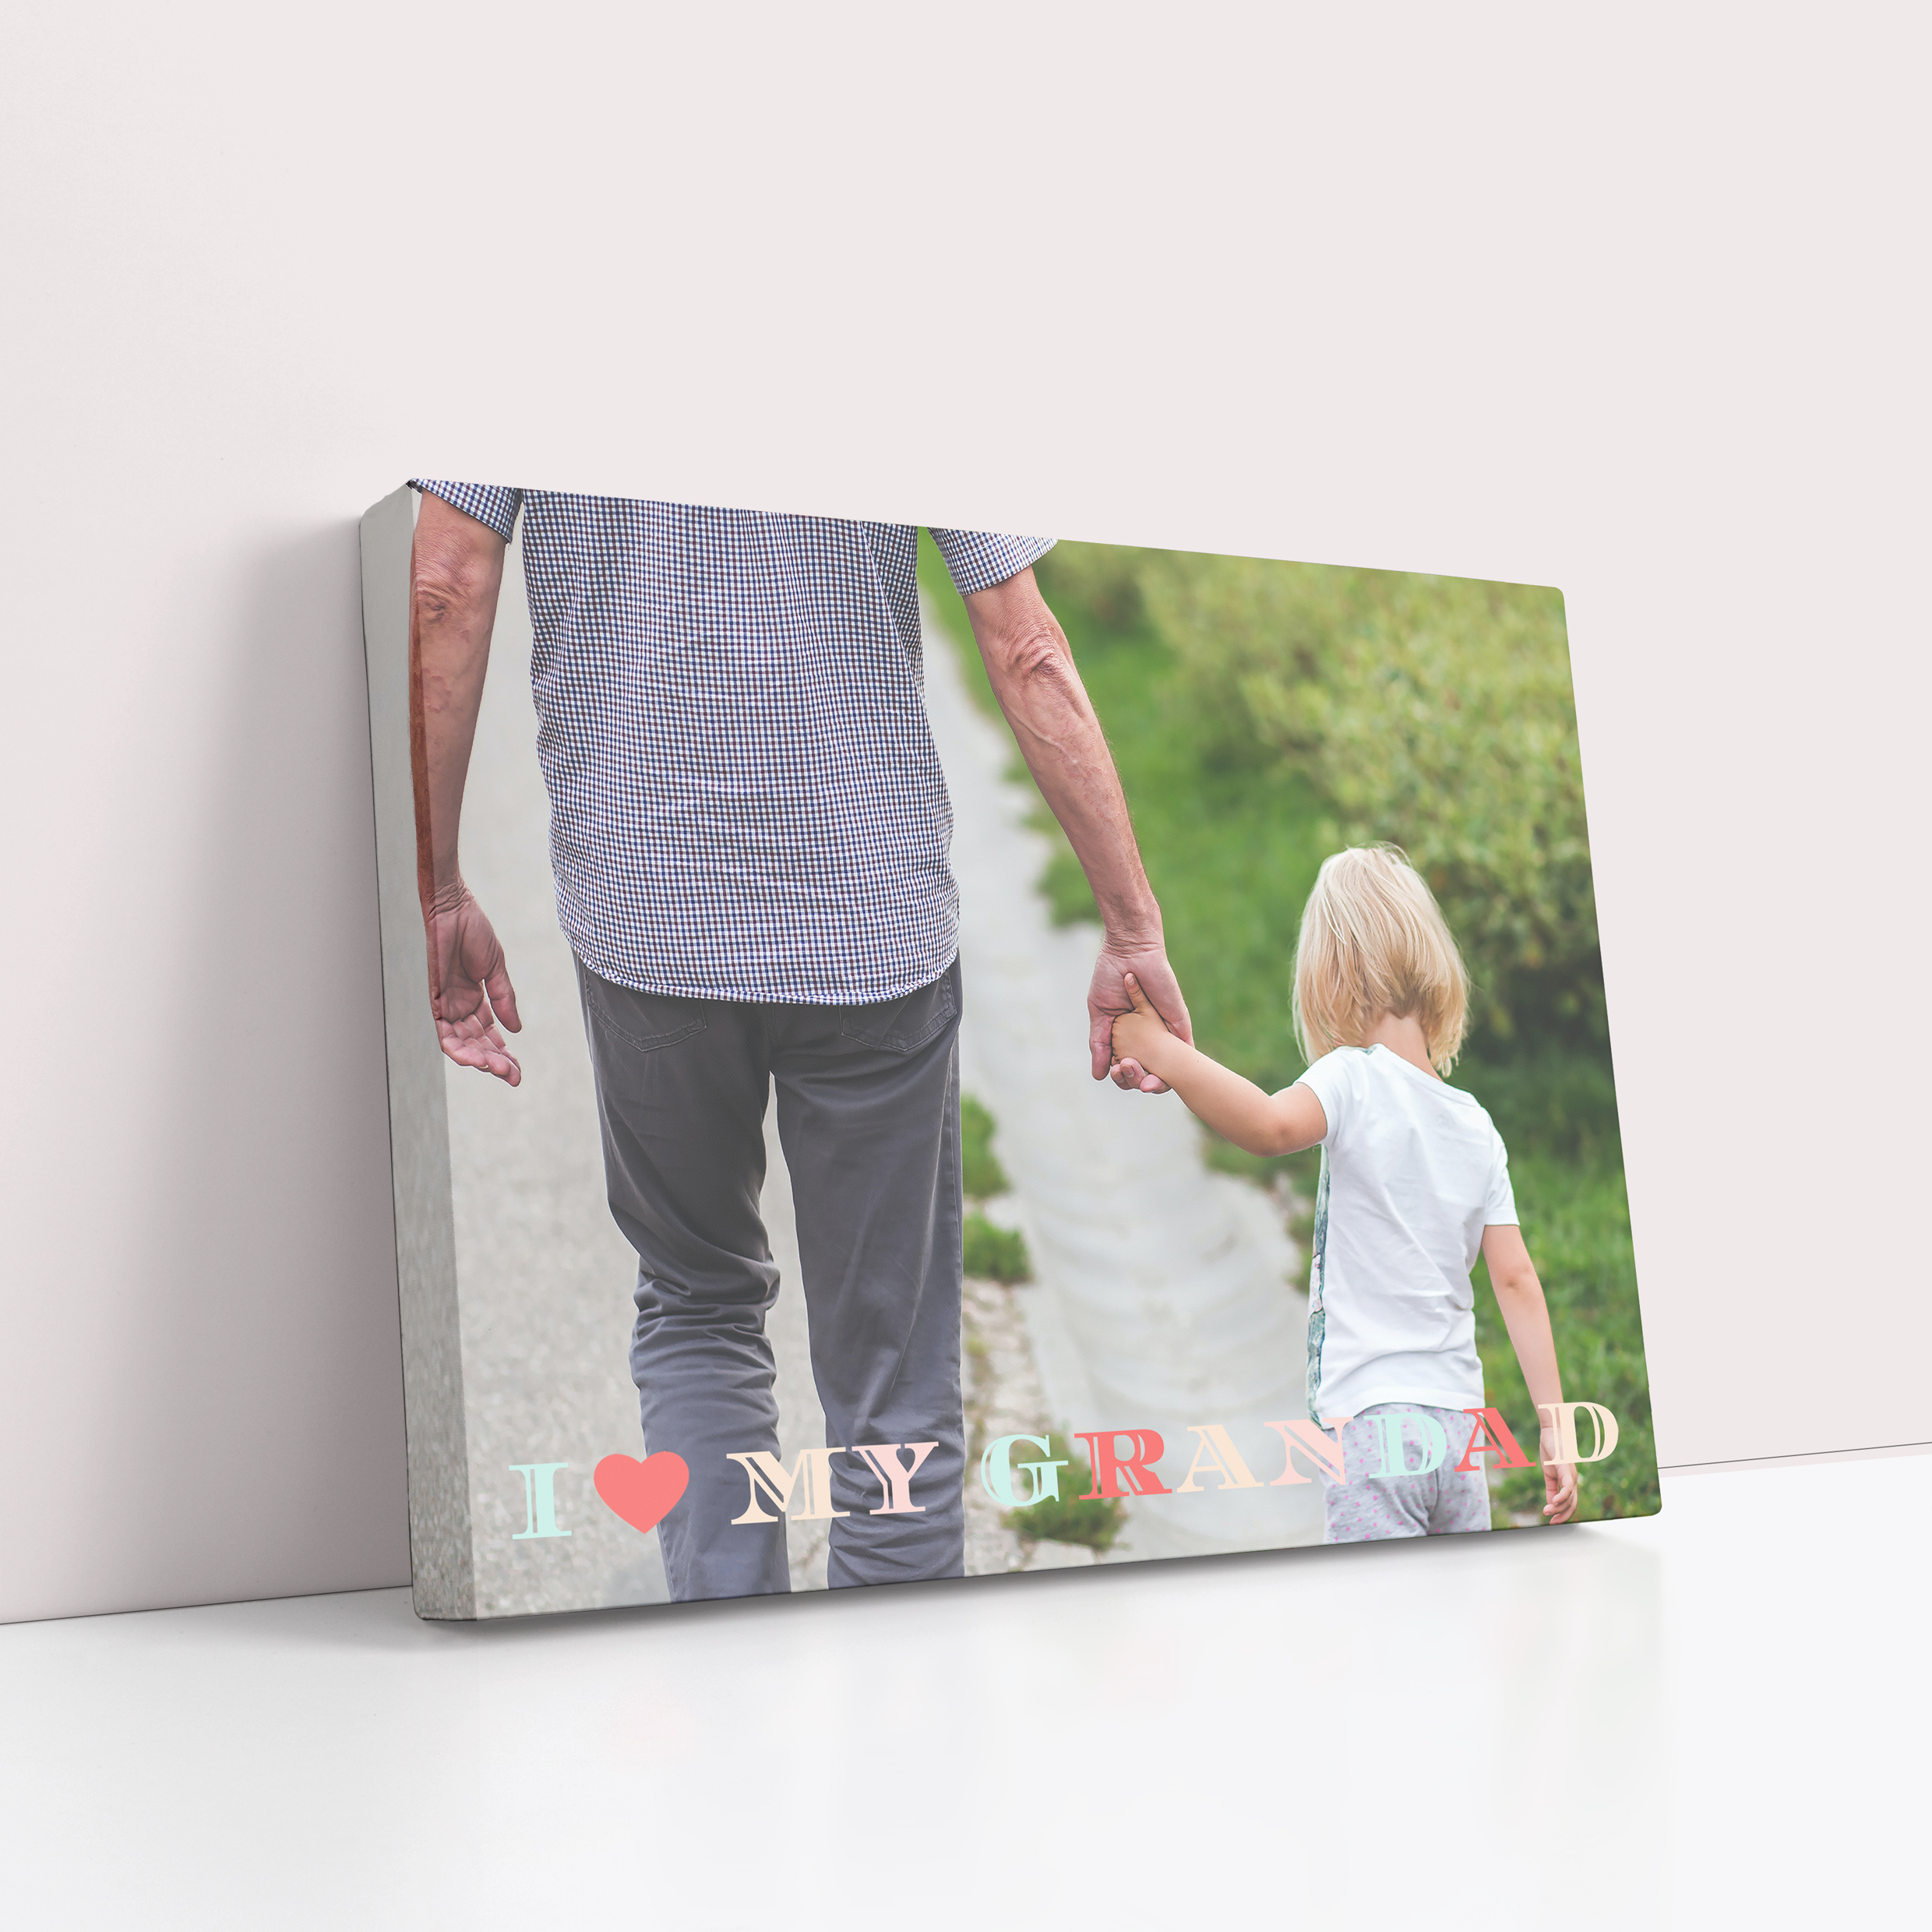 Personalised Stretch Canvas Print featuring Grandpa's Day design - Capture cherished memories in a captivating 3D effect